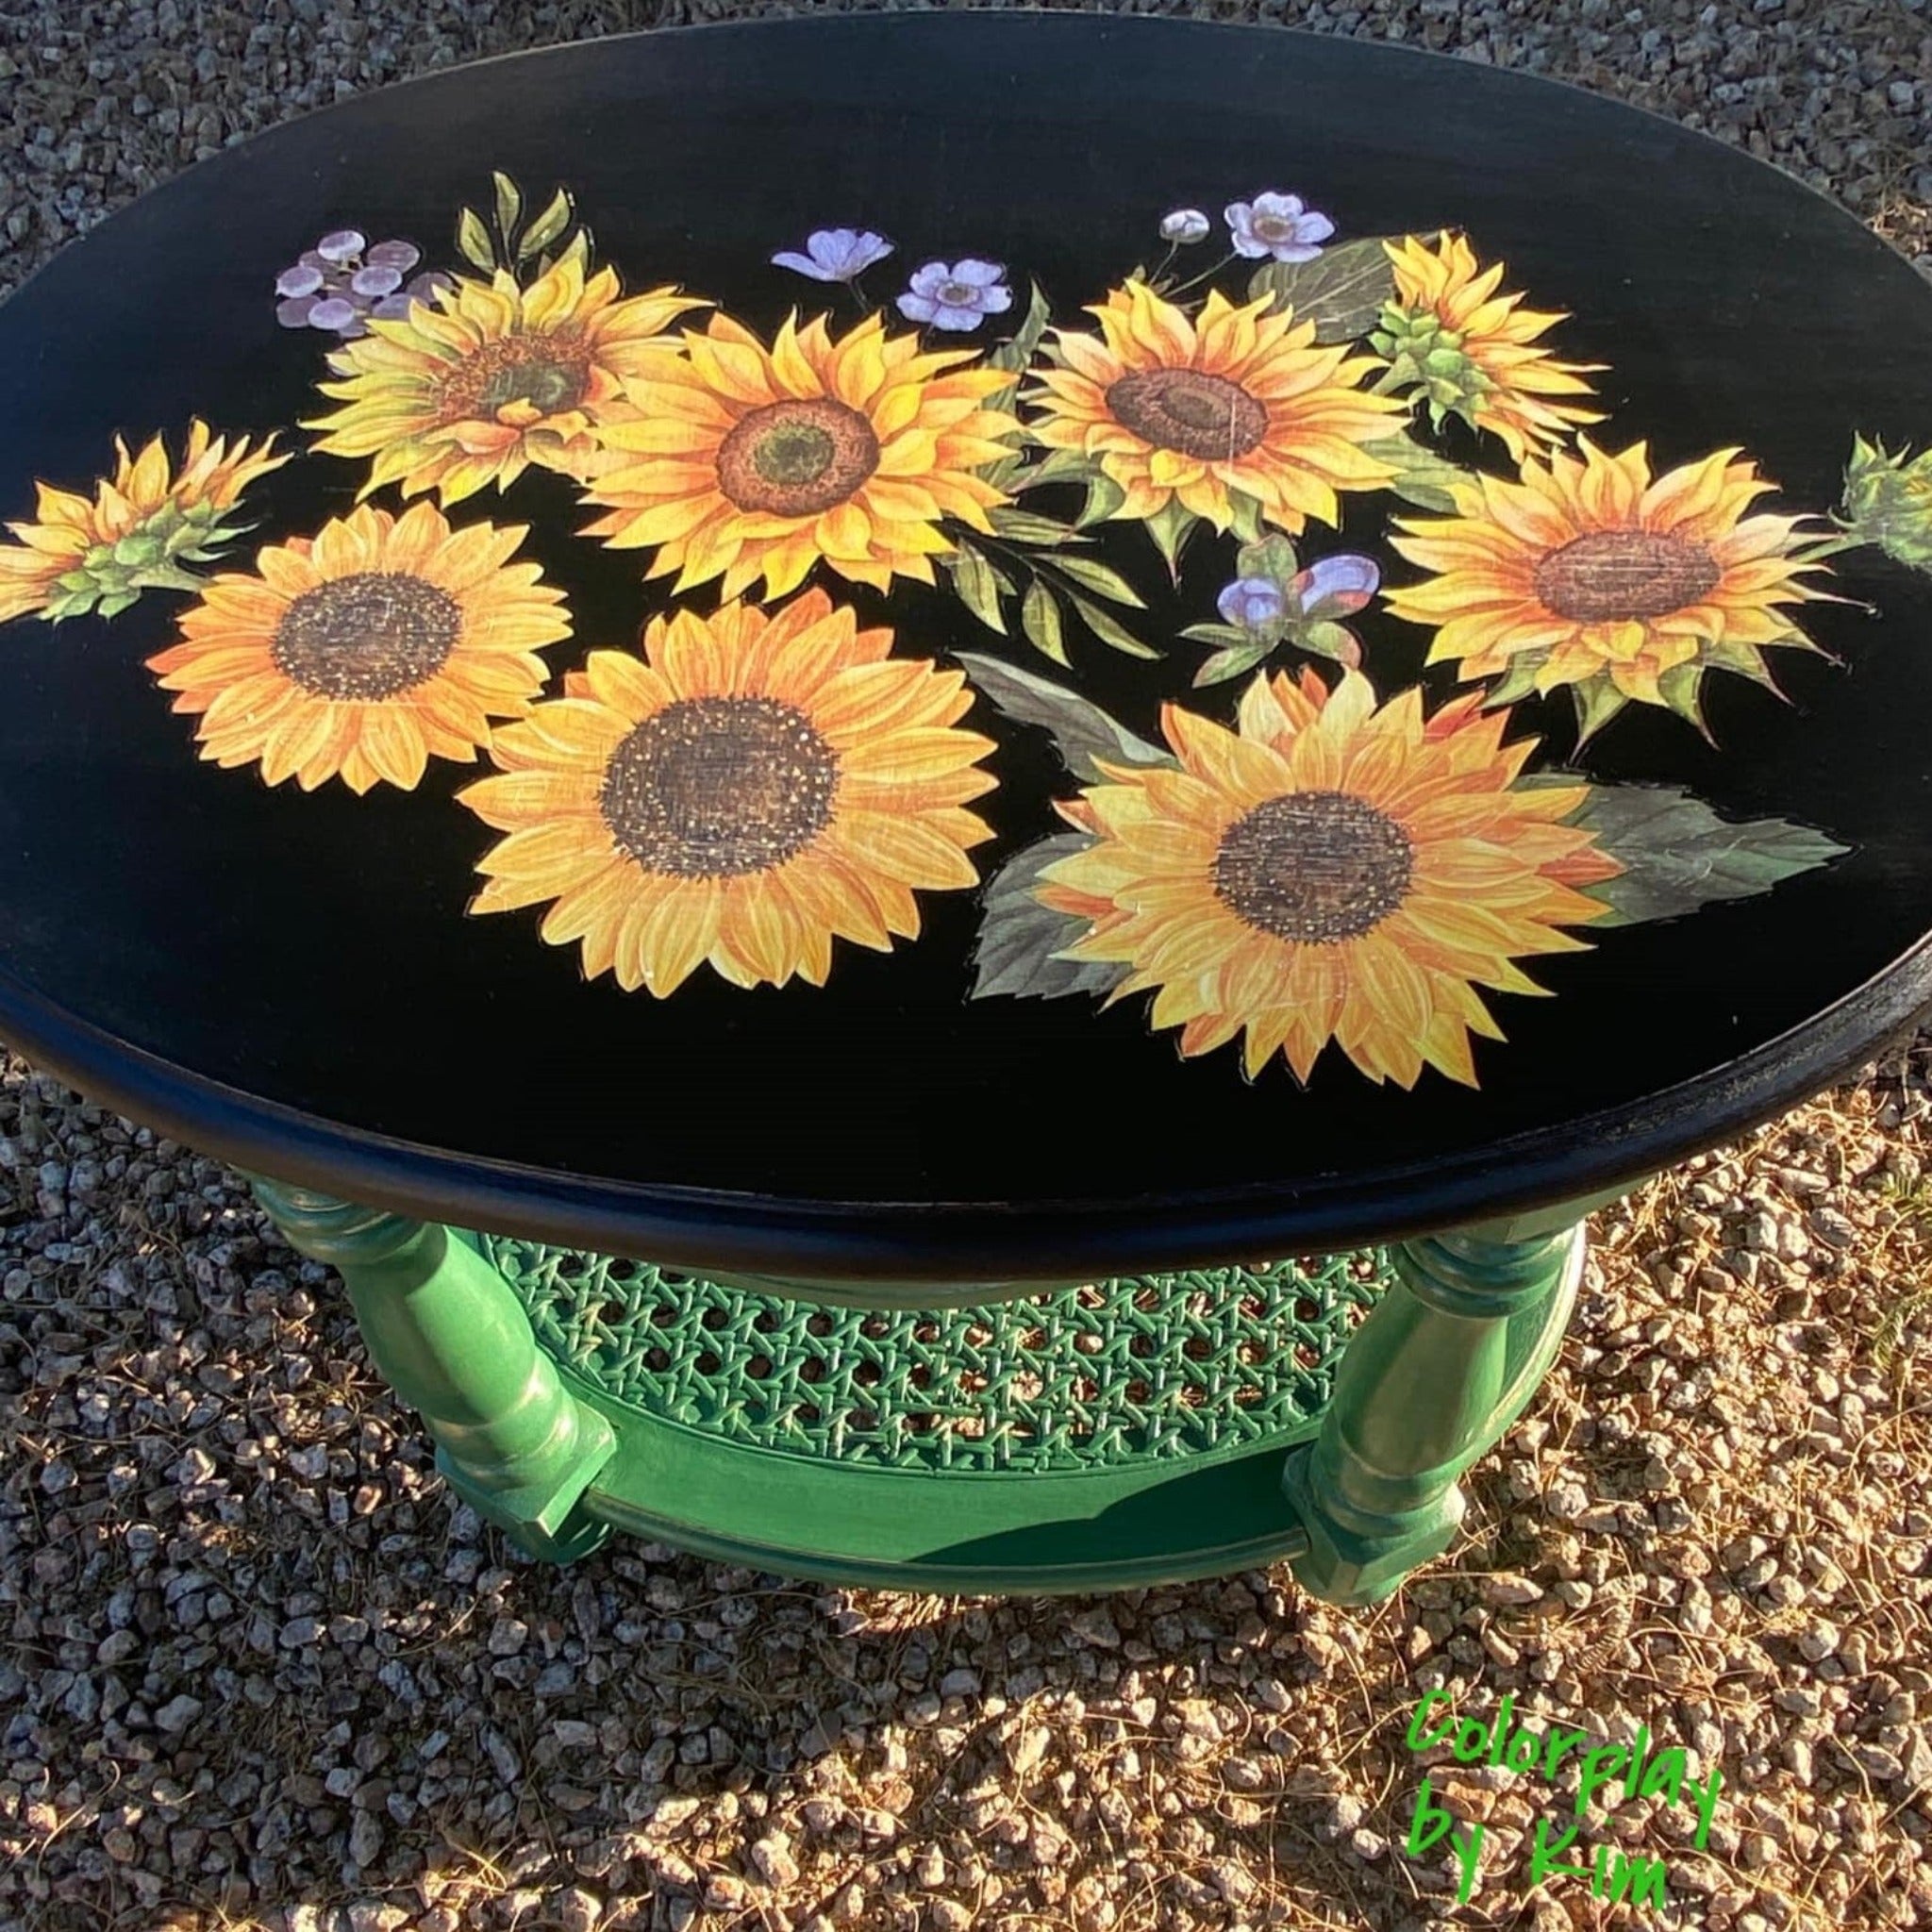 A vintage oval end table refurbished by Colorplay by Kim is painted green with a black top and features ReDesign with Prima's Sunflower Fields transfer on the table top.